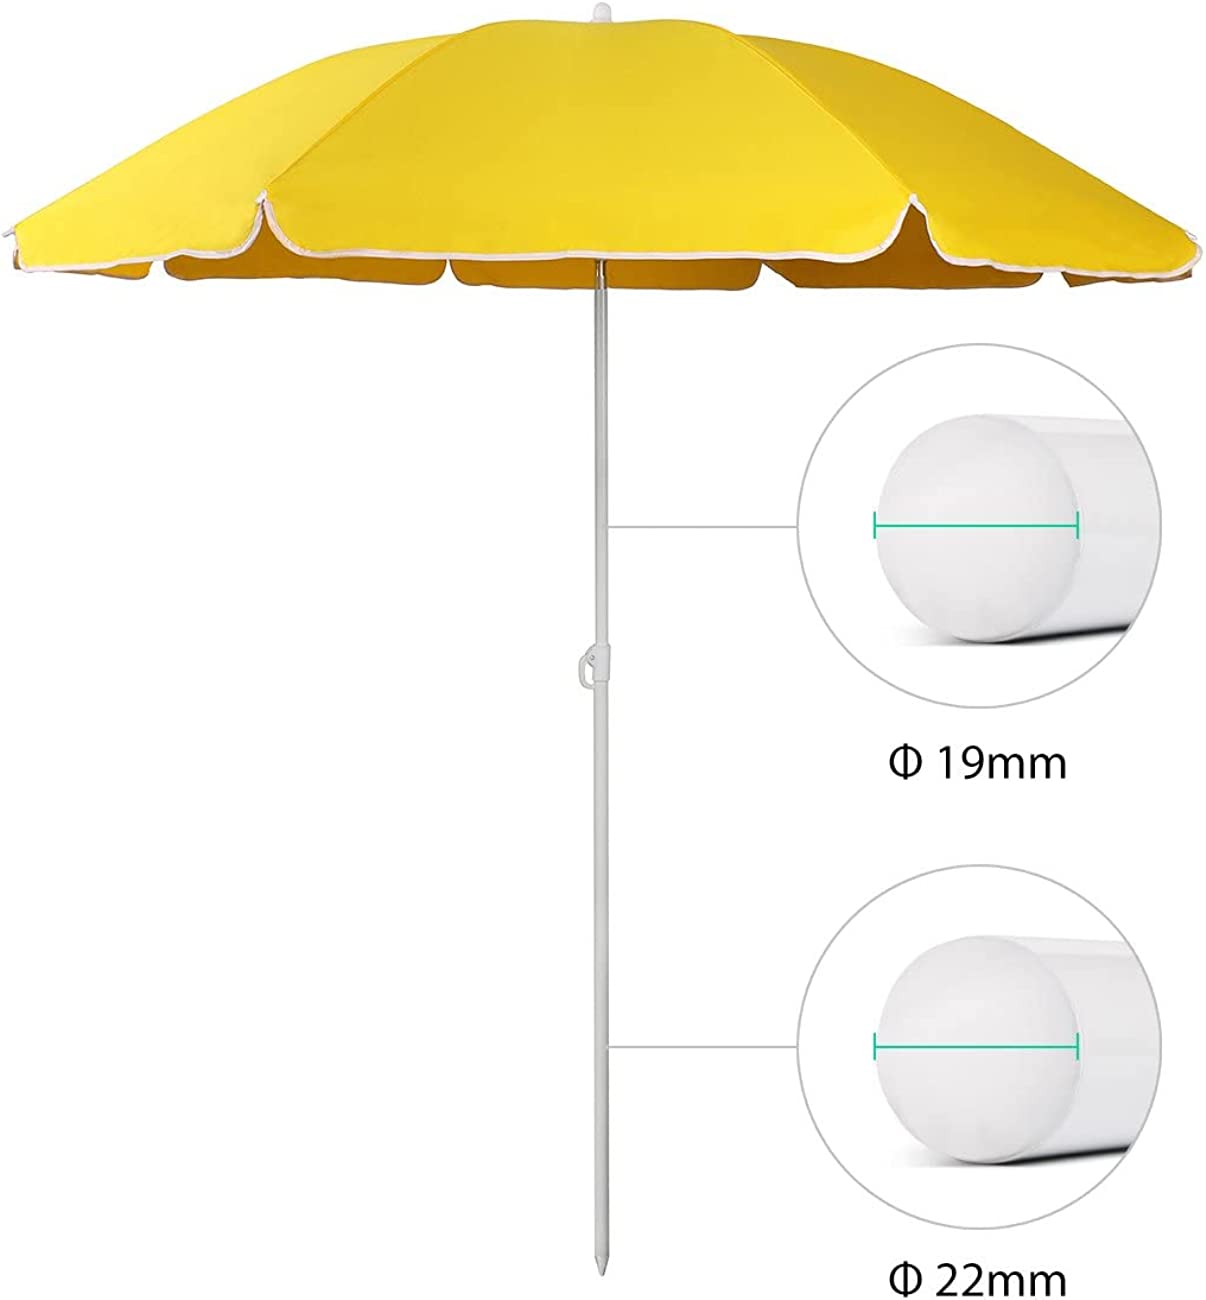 1.6M Beach Umbrella with Umbrella Cover, Stable Parasol with Eight Ribs for Balcony, Garden & Patio. Tilt Angle and Height Adjustable